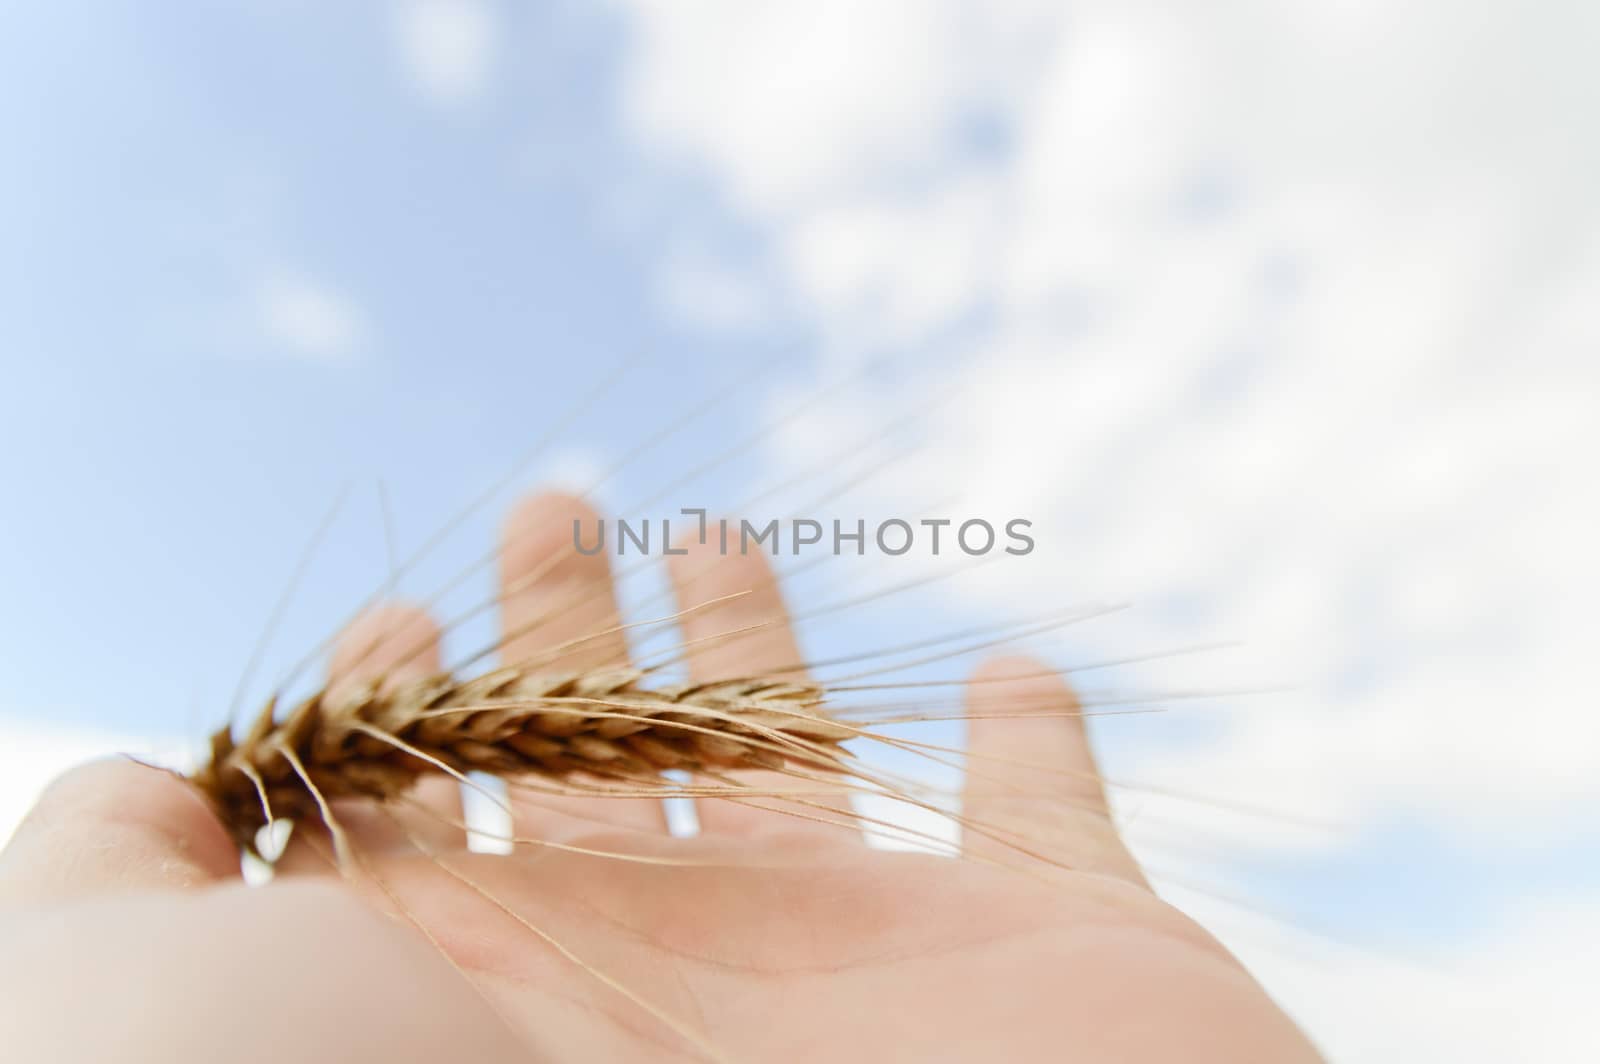 wheat on hand and blue sky, nature series